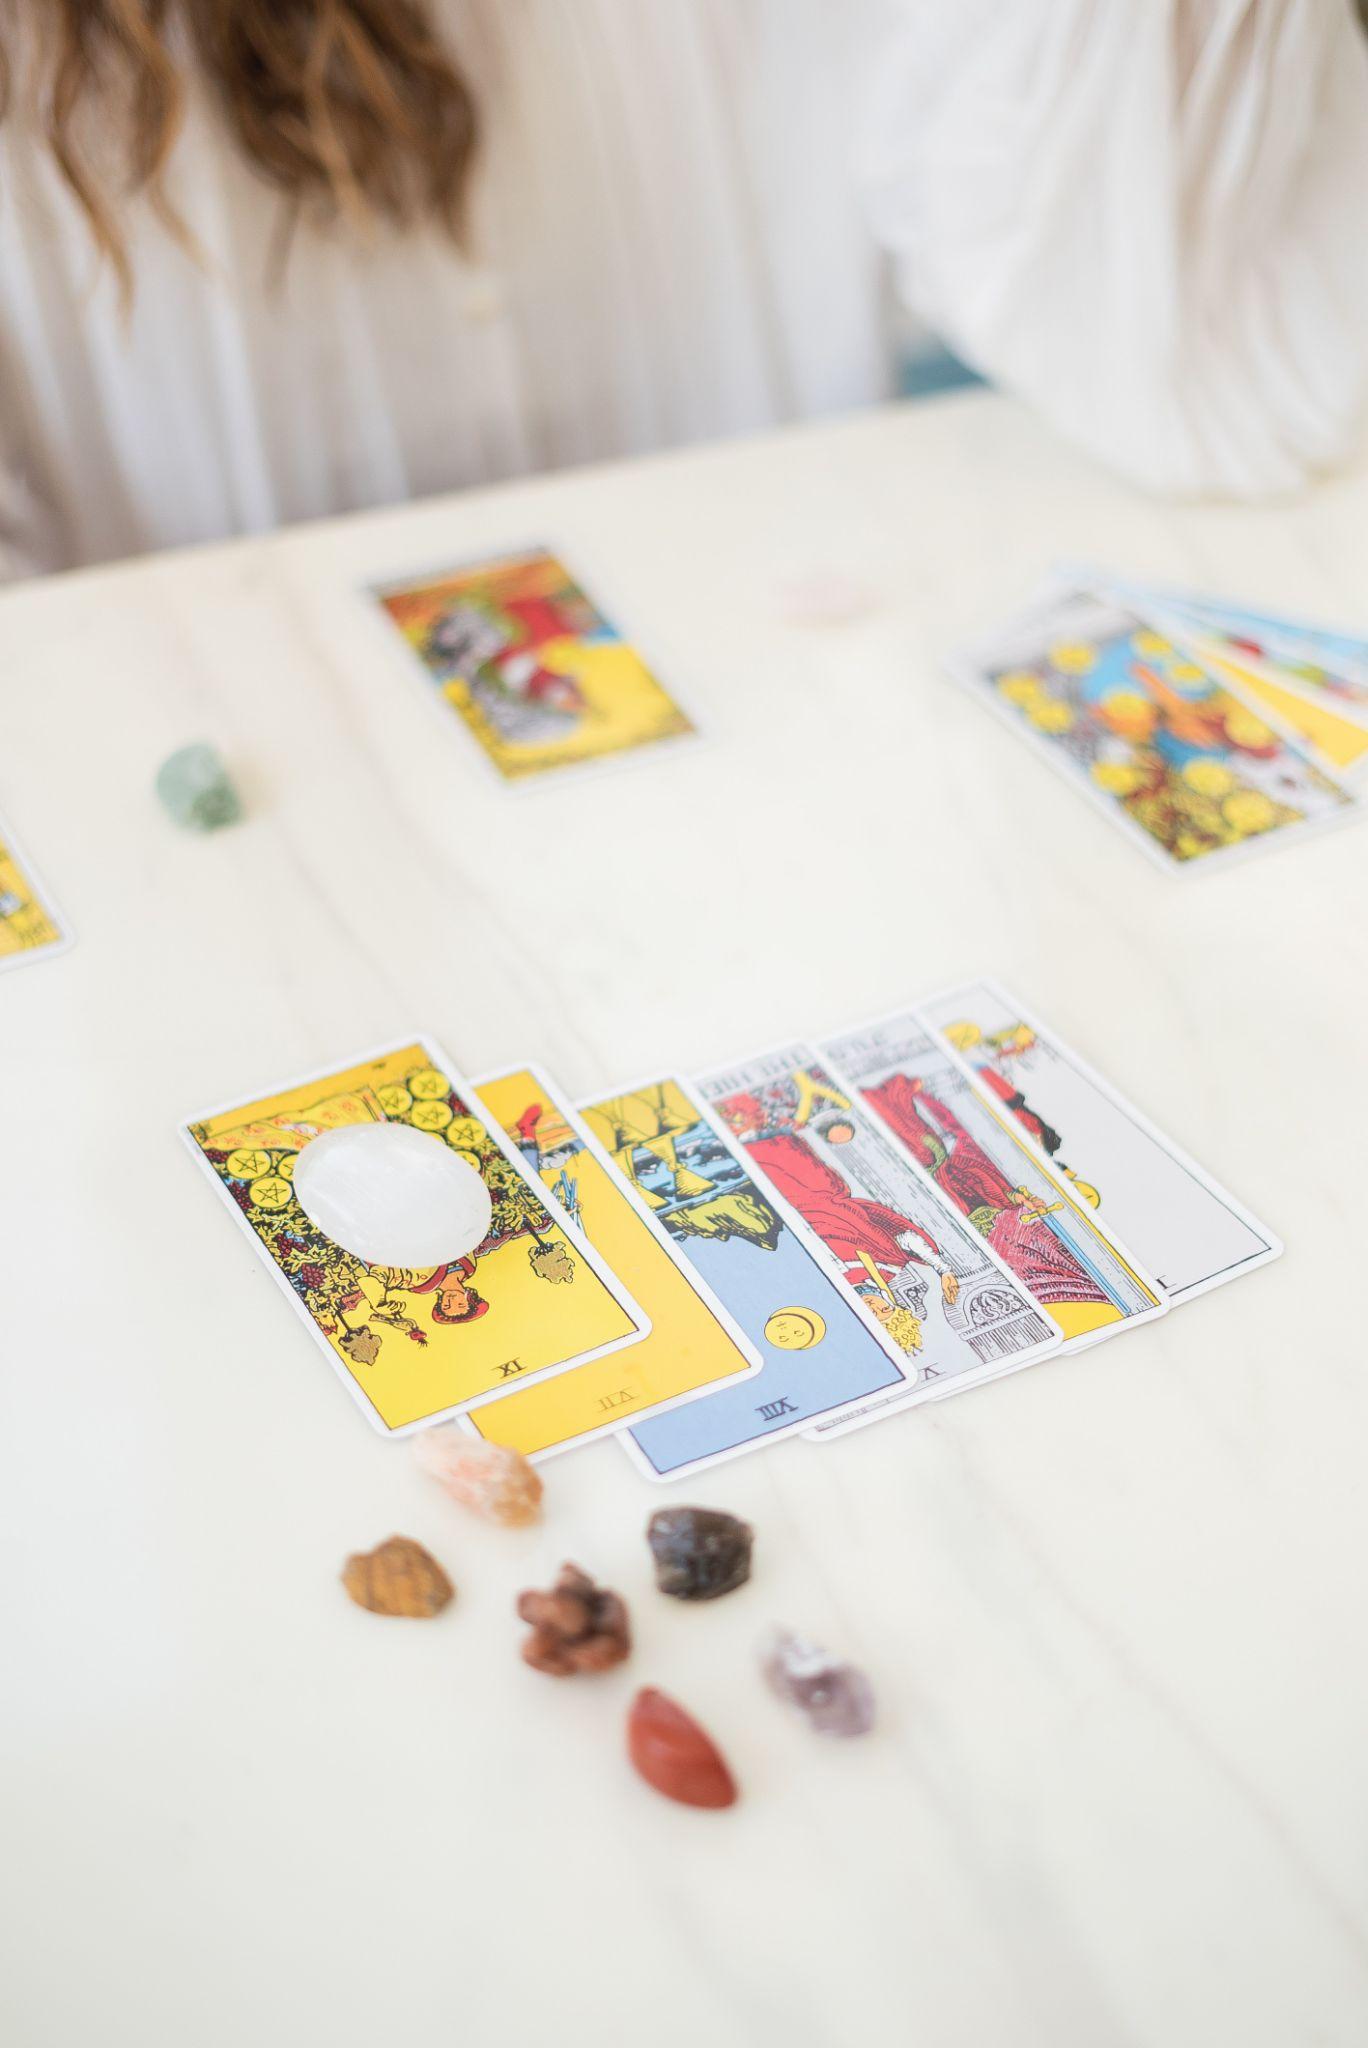 Tarot cards arranged in an organized spread on a white table with crystals lying close by.